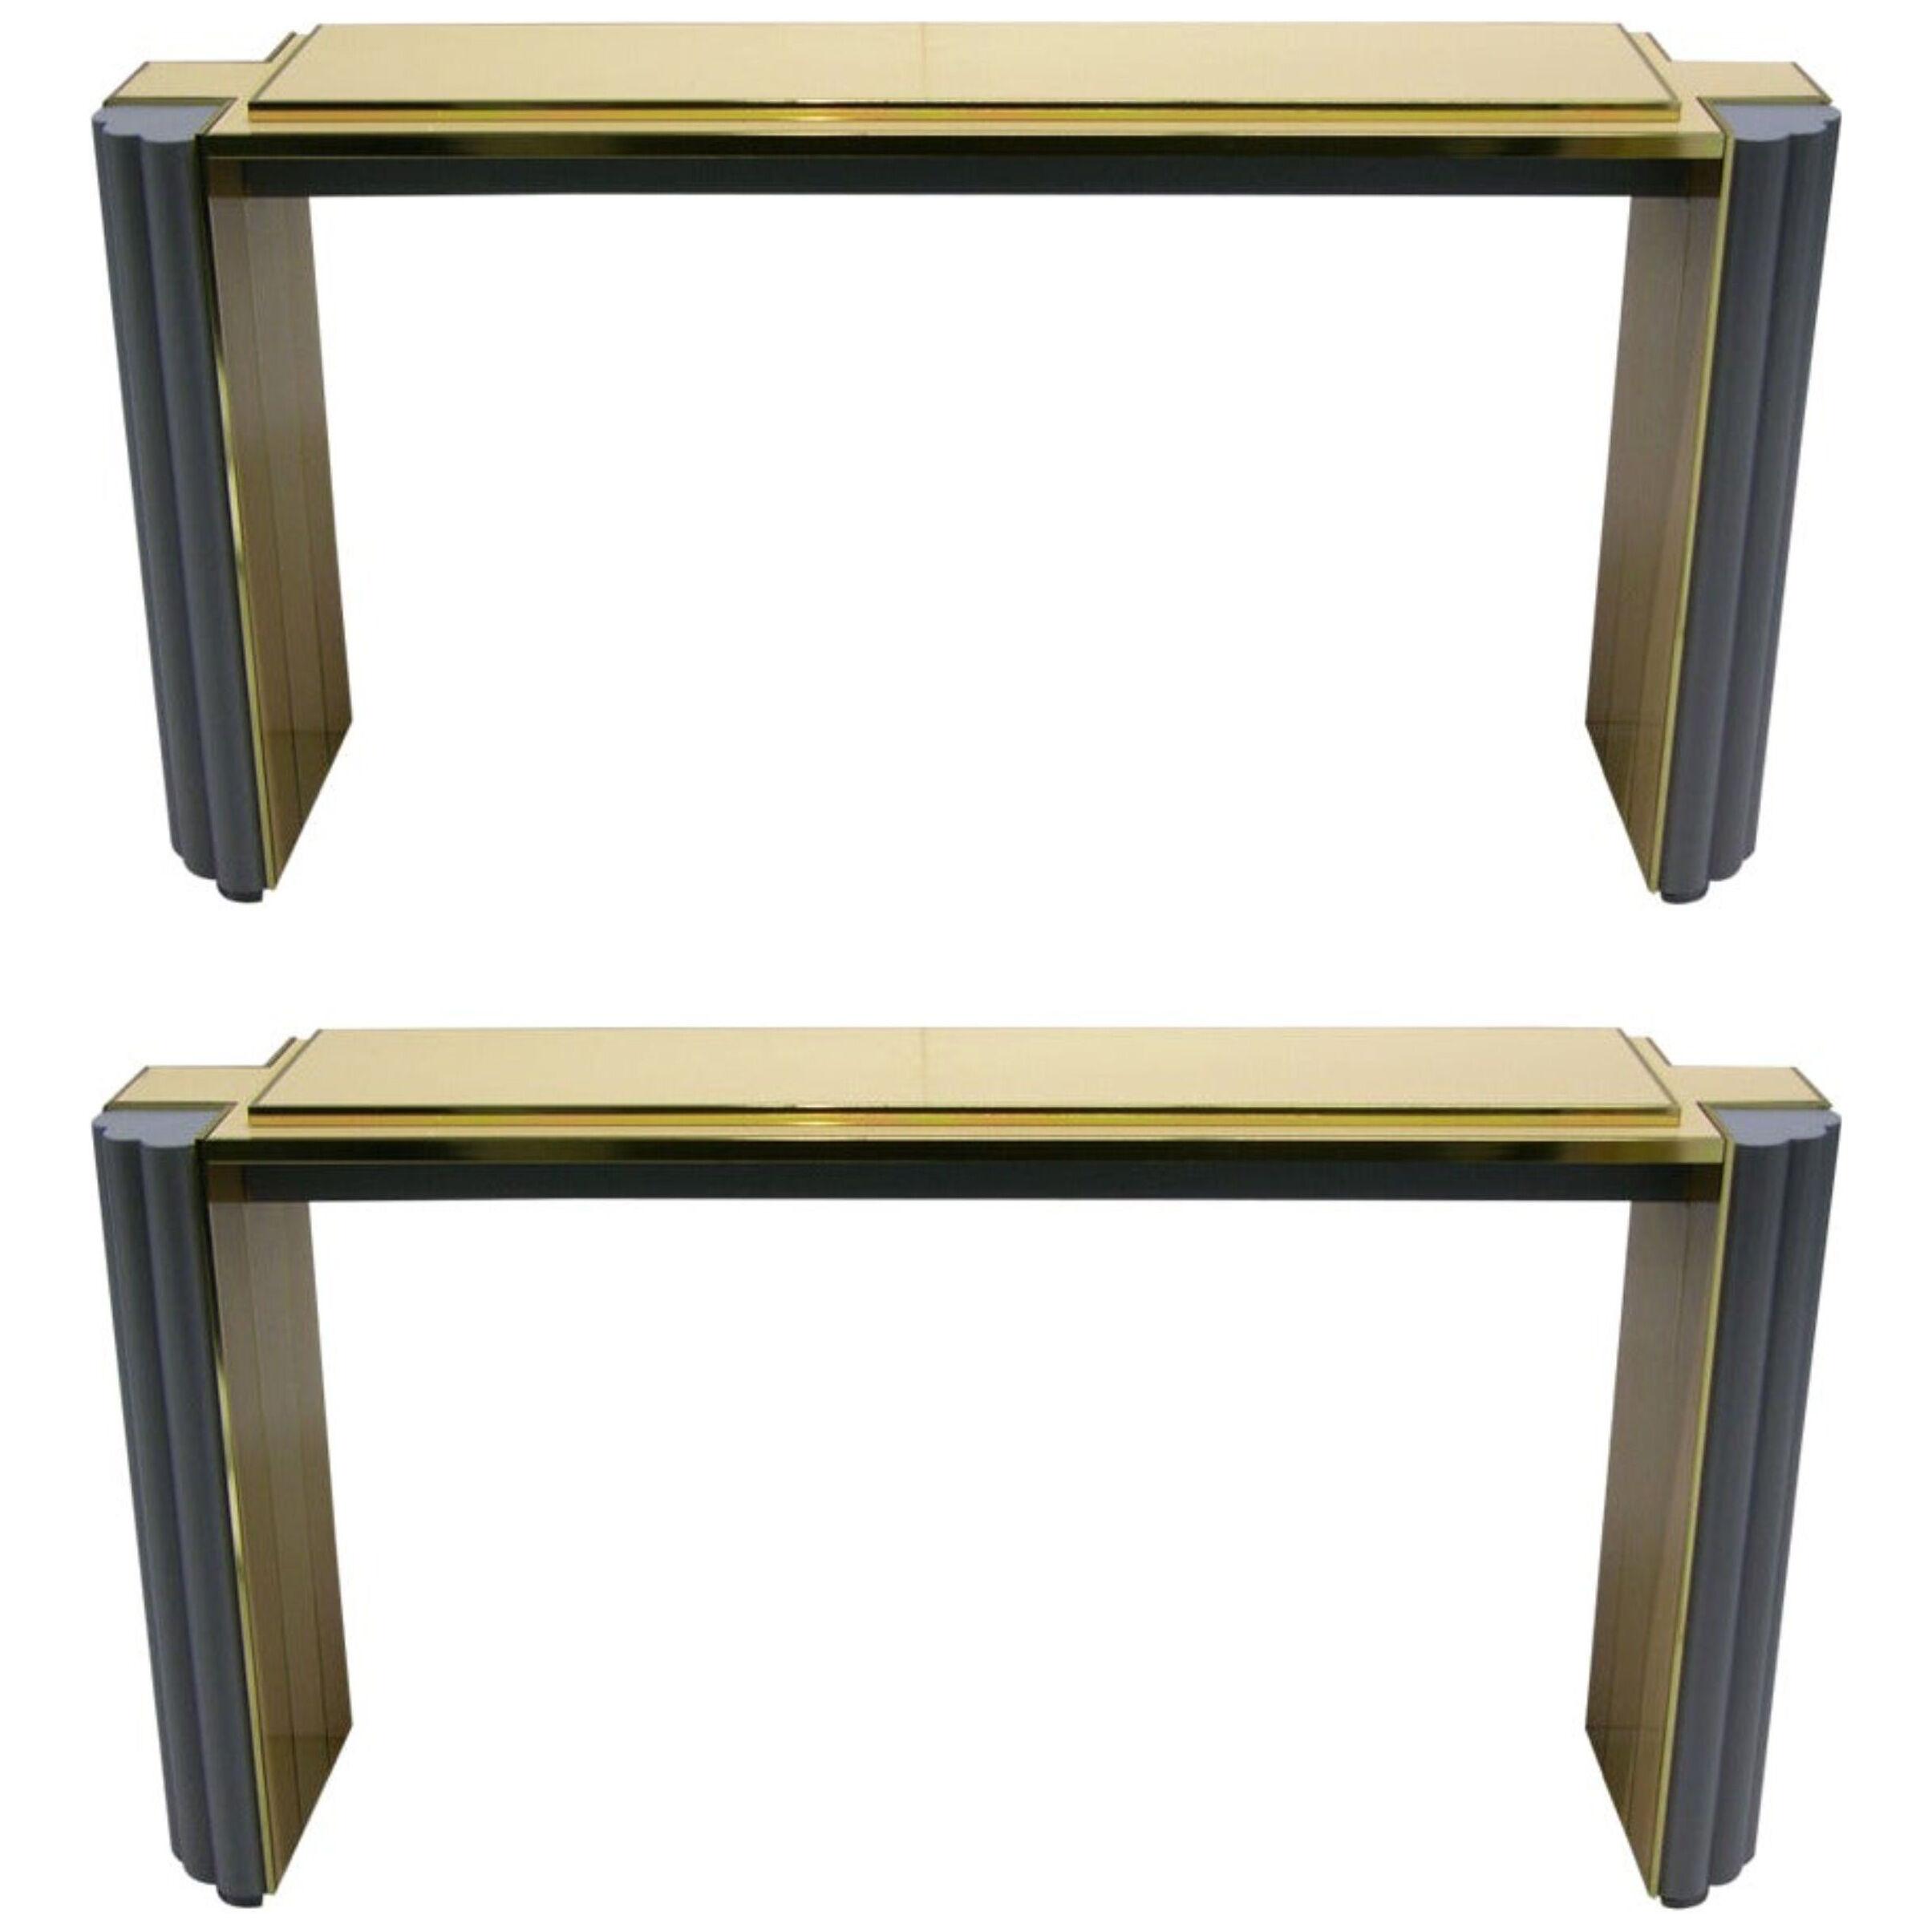 Alain Delon 1970s Pair of Gray and Cream Console Tables for Maison Jansen	